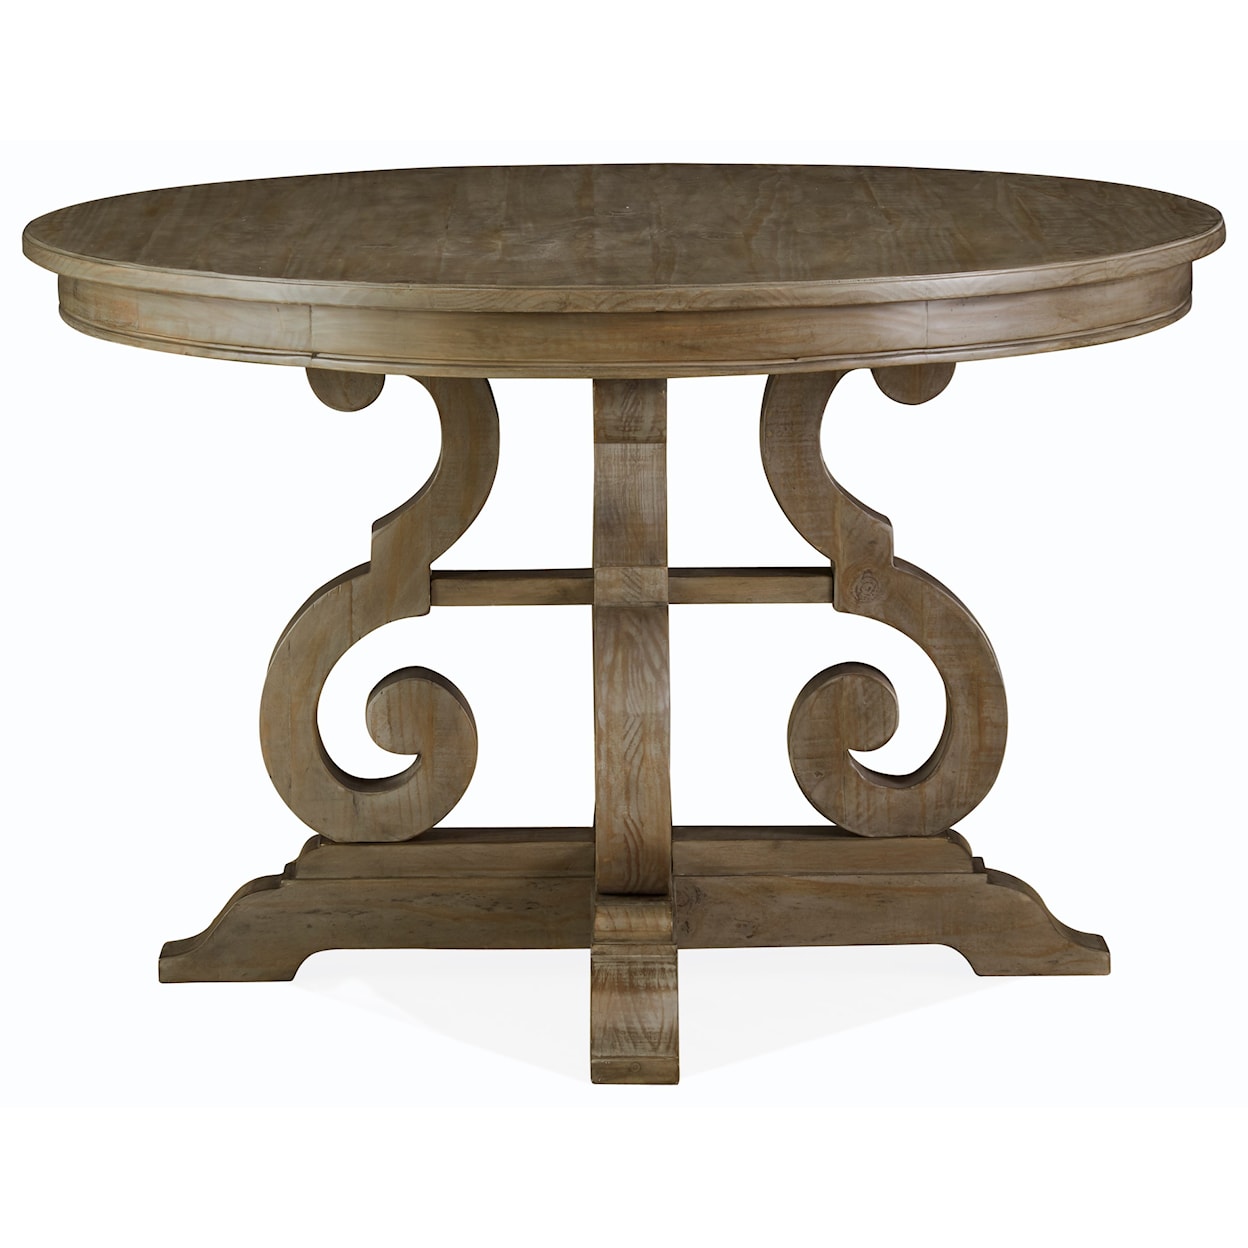 Magnussen Home Tinley Park Dining 48" Round Dining Table